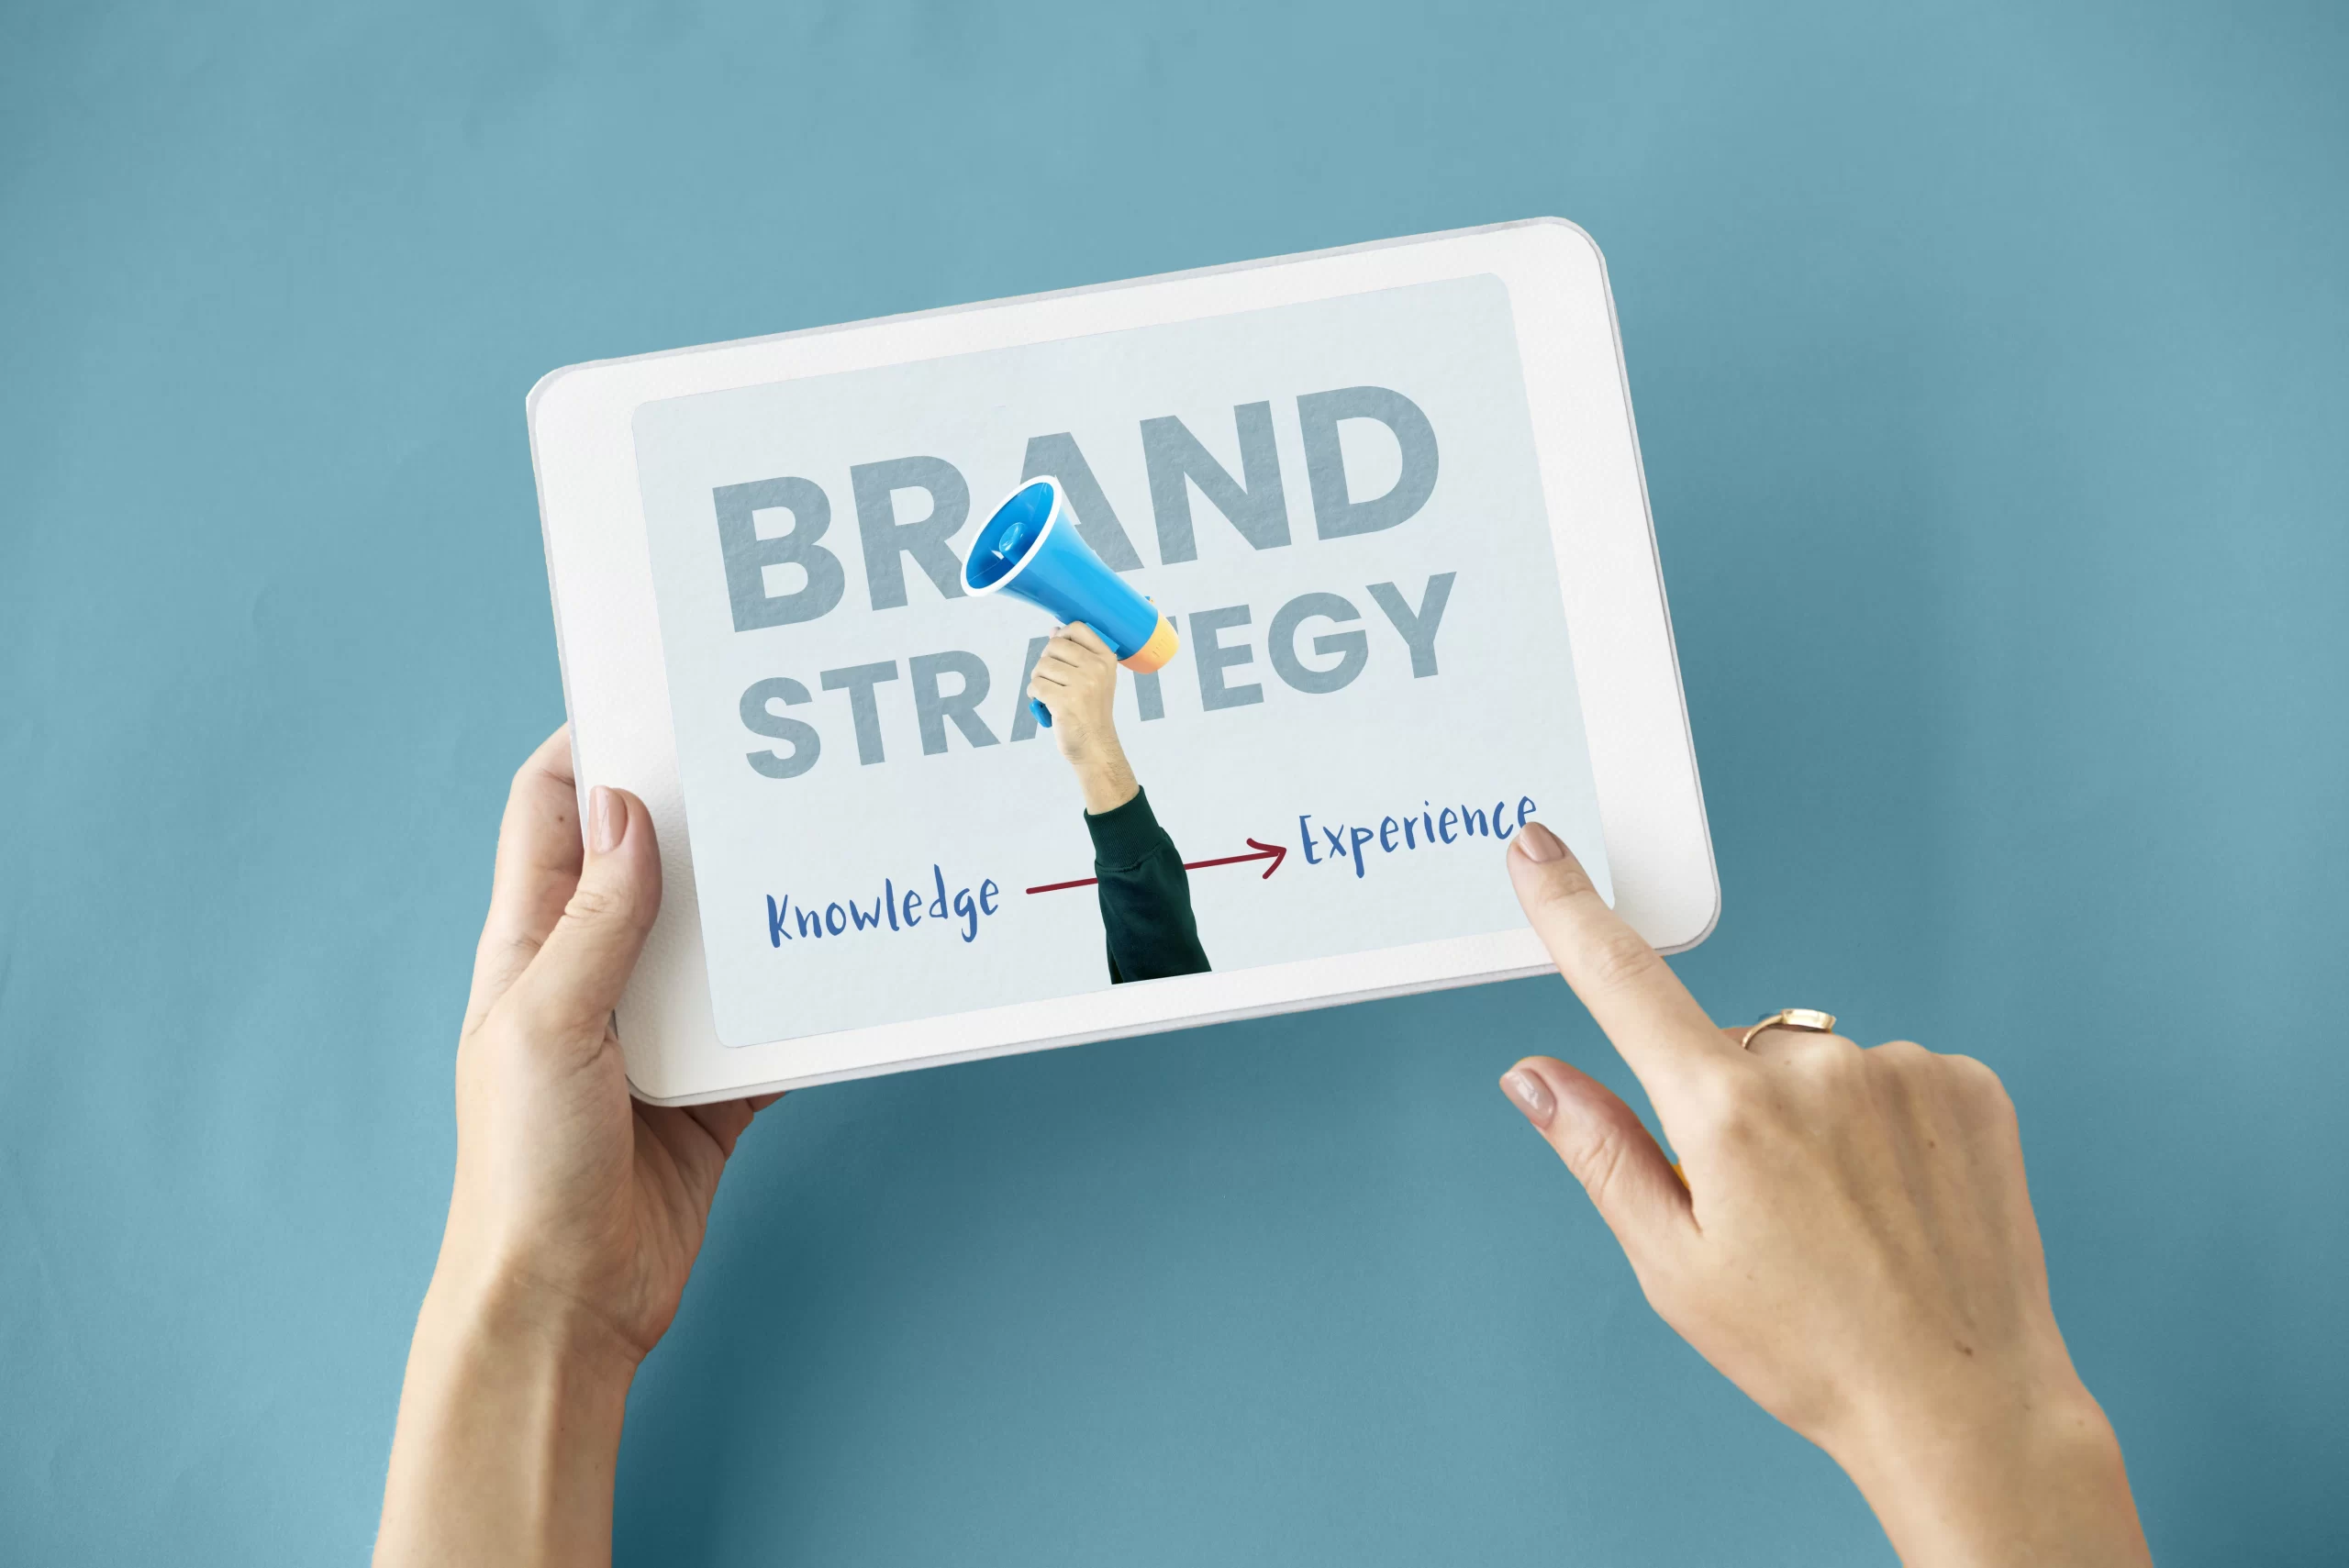 A practical guide to building a brand strategy